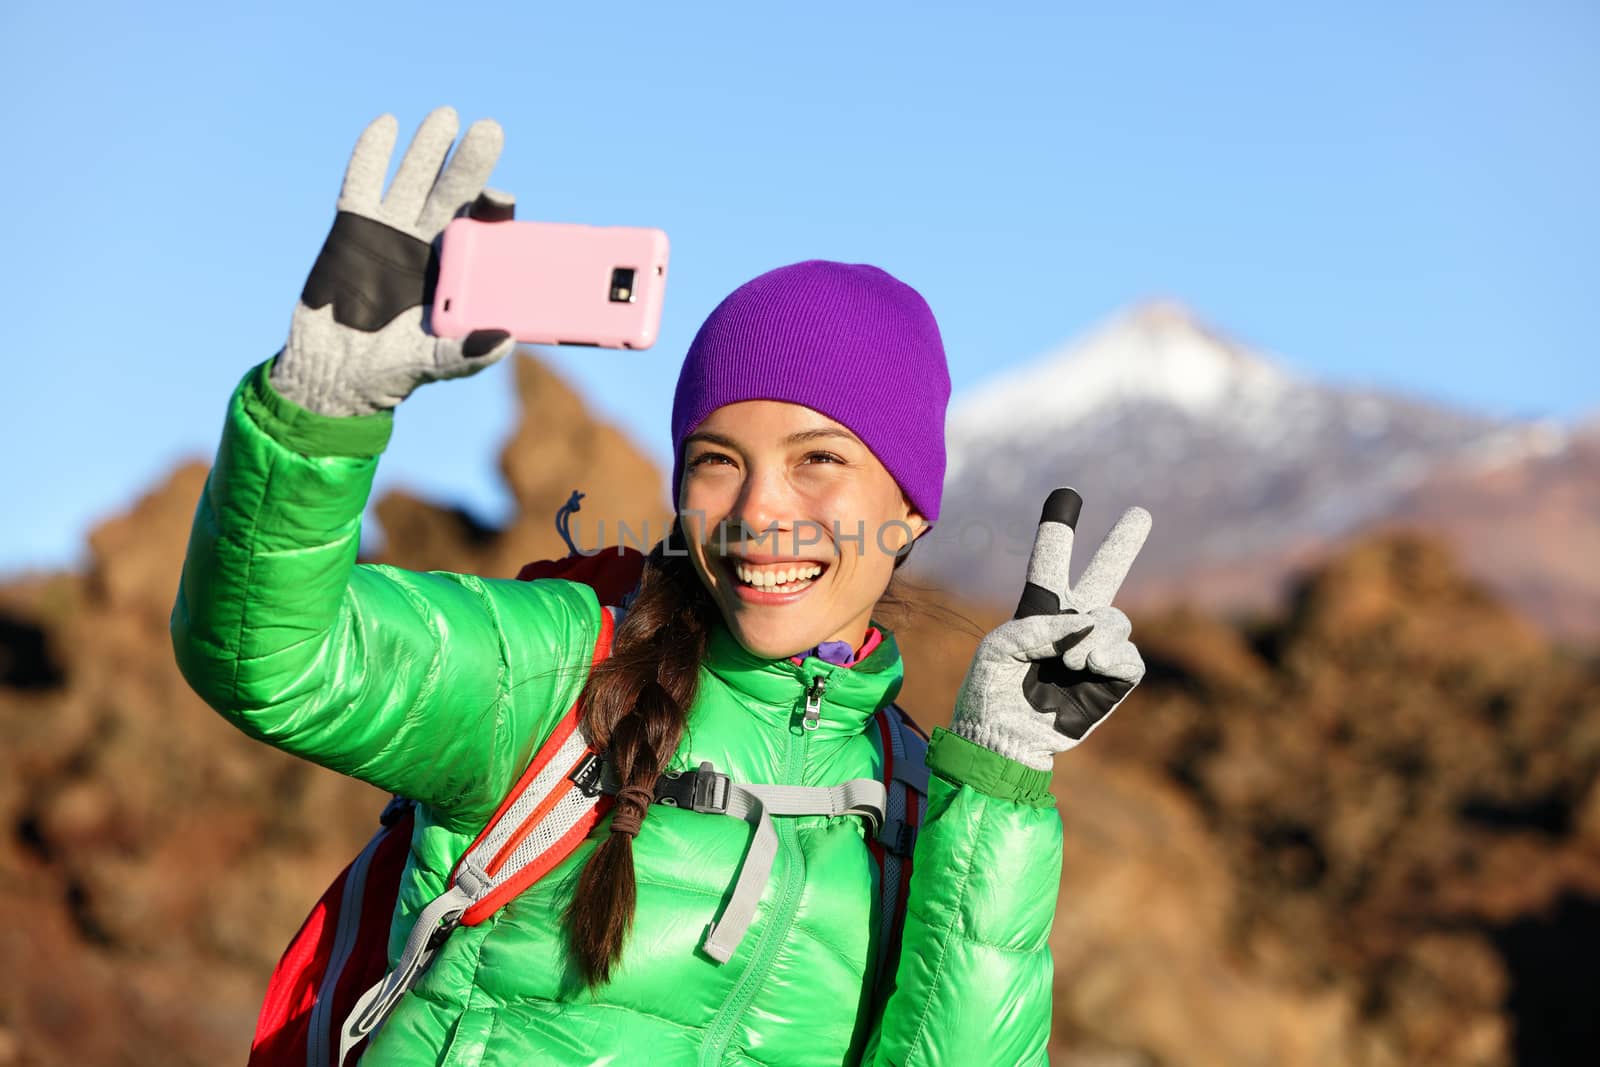 Woman hiker taking selfie photo using smartphone while hiking in winter jacket and clothing enjoying outdoor activity. Woman hiker taking self-portrait picture with smart phone camera.